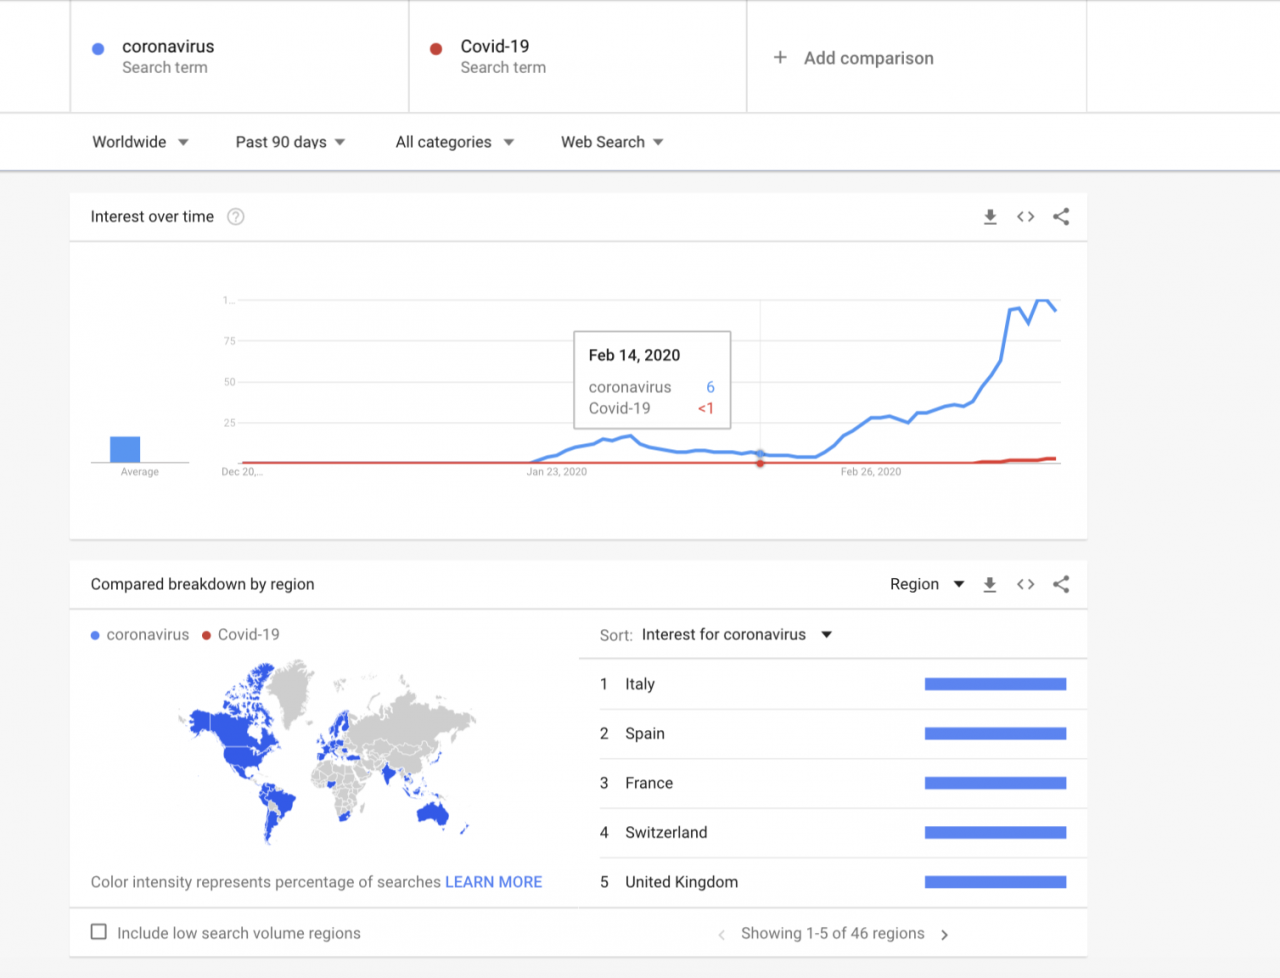 Screenshot of Google Trends showing search terms of covid-19 and coronavirus. Higher search result for coronavirus.